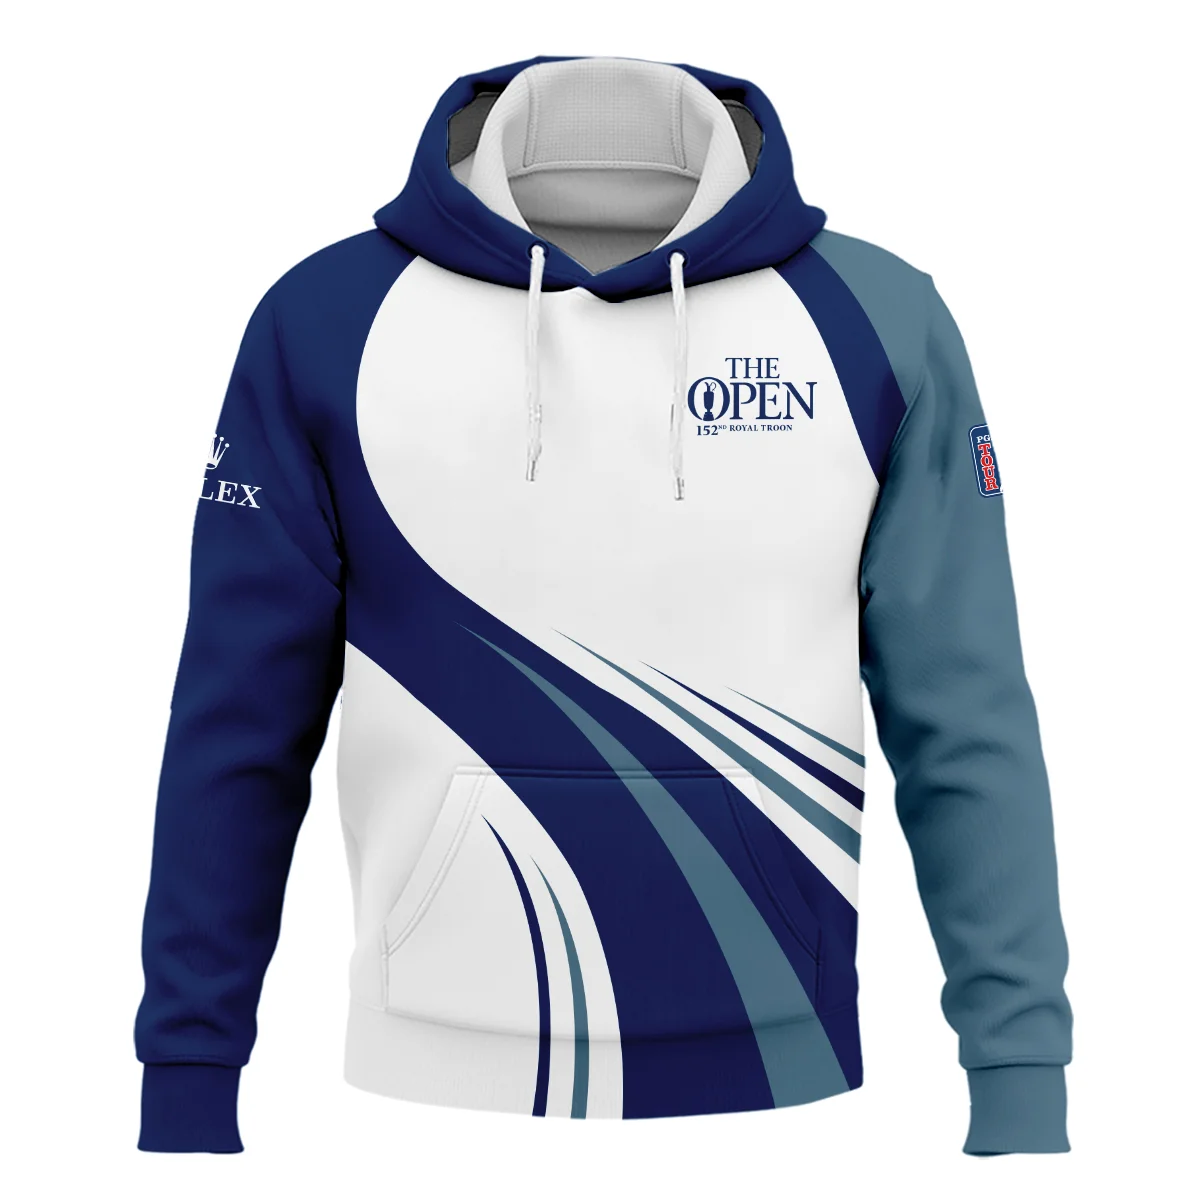 152nd Open Championship Rolex White Mostly Desaturated Dark Blue Performance Quarter Zip Sweatshirt With Pockets All Over Prints HOTOP270624A02ROXTS